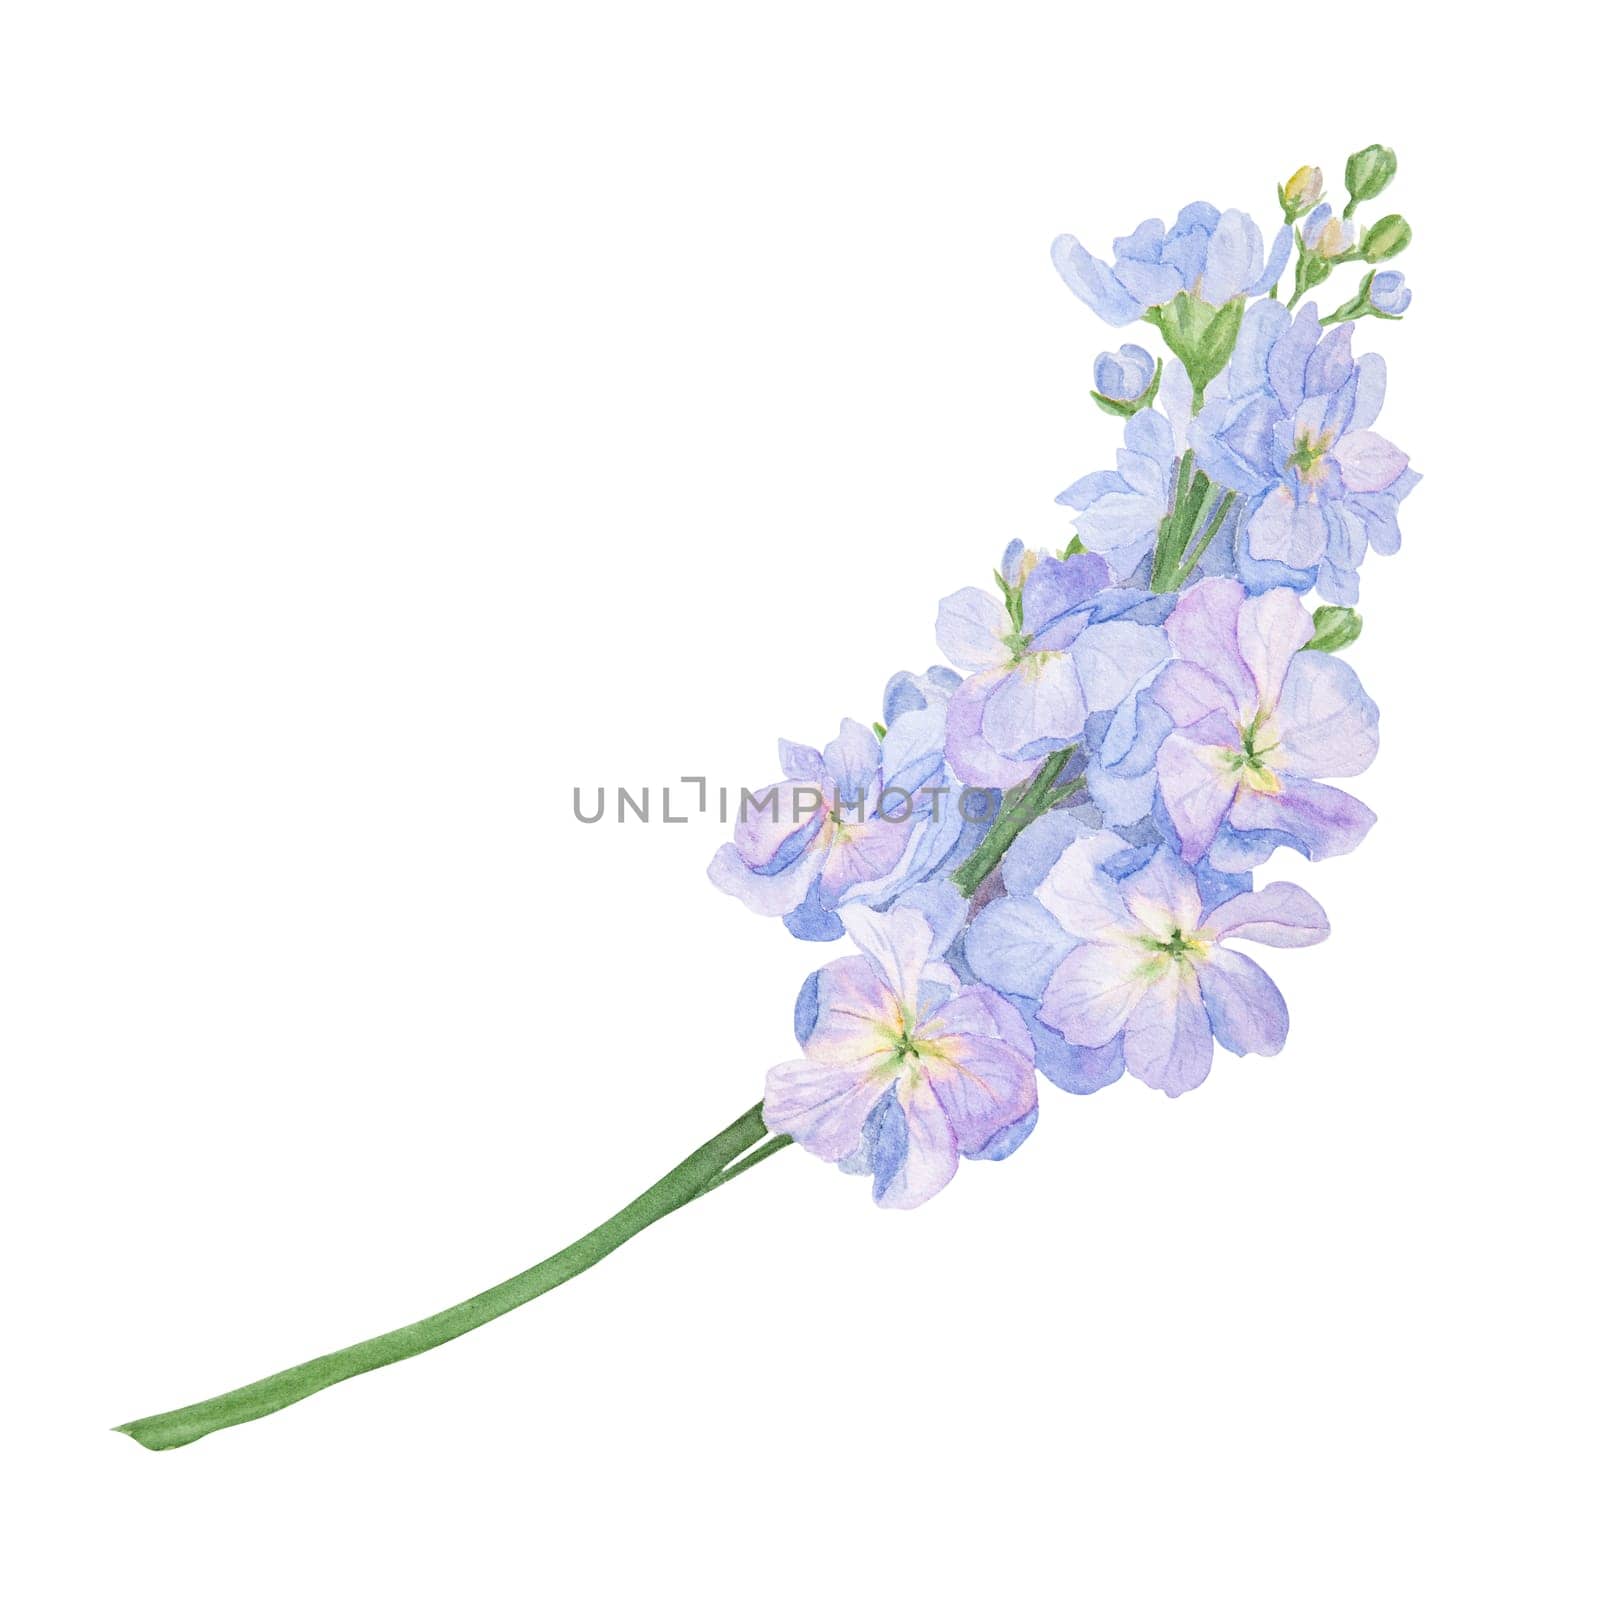 Garden blue stock, gillyflower watercolor illustration. Hand drawn botanical painting, floral sketch. Colorful sweet pea flower clipart for summer or autumn design of wedding invitation, prints, greetings, sublimation, textile